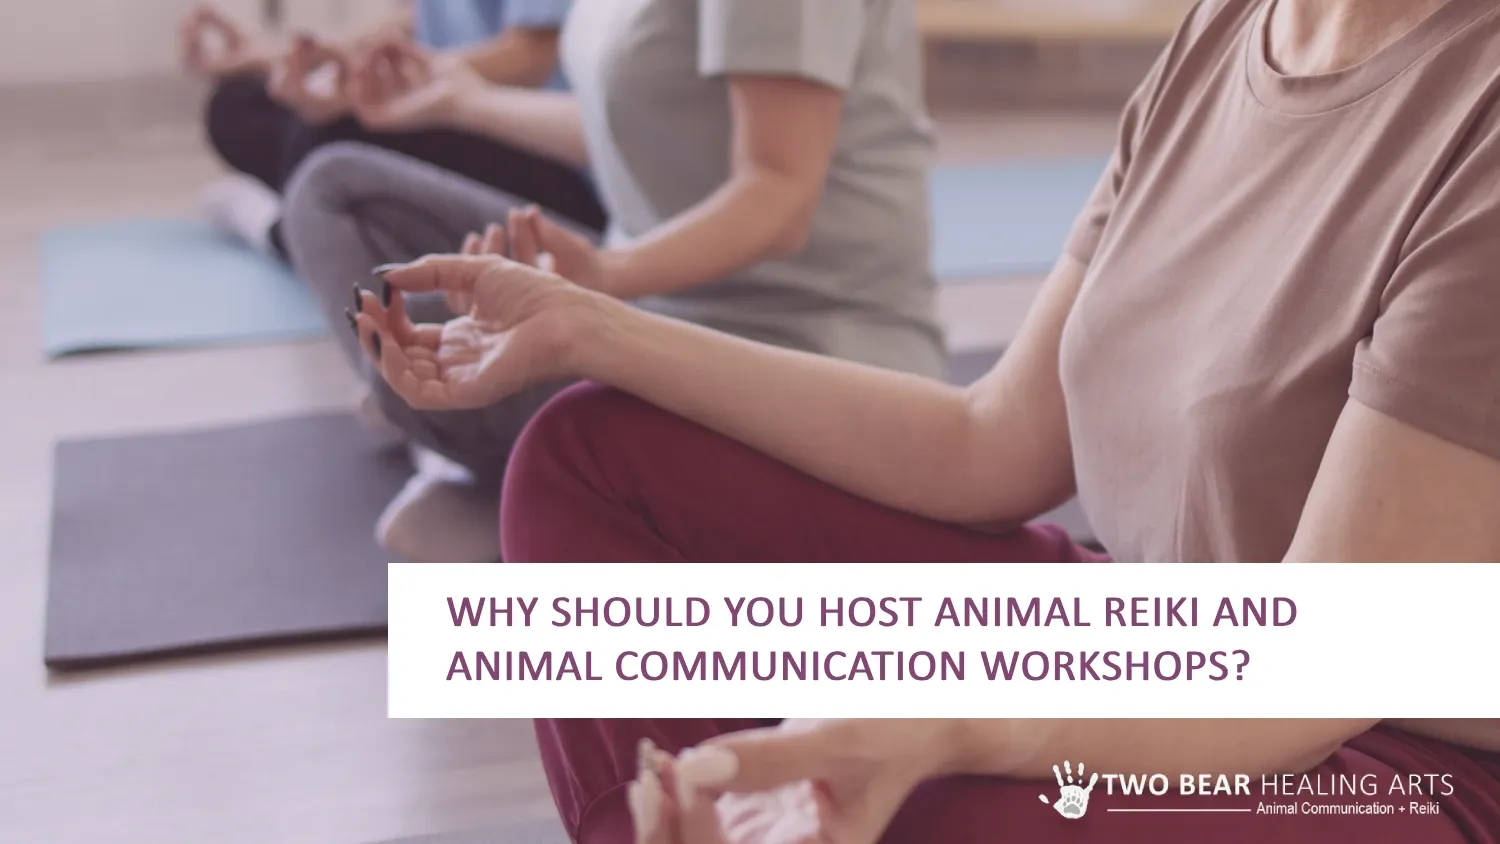 Promote animal well-being with Reiki! Image shows peaceful women meditating, symbolizing the calming and restorative potential of Reiki workshops for animals.